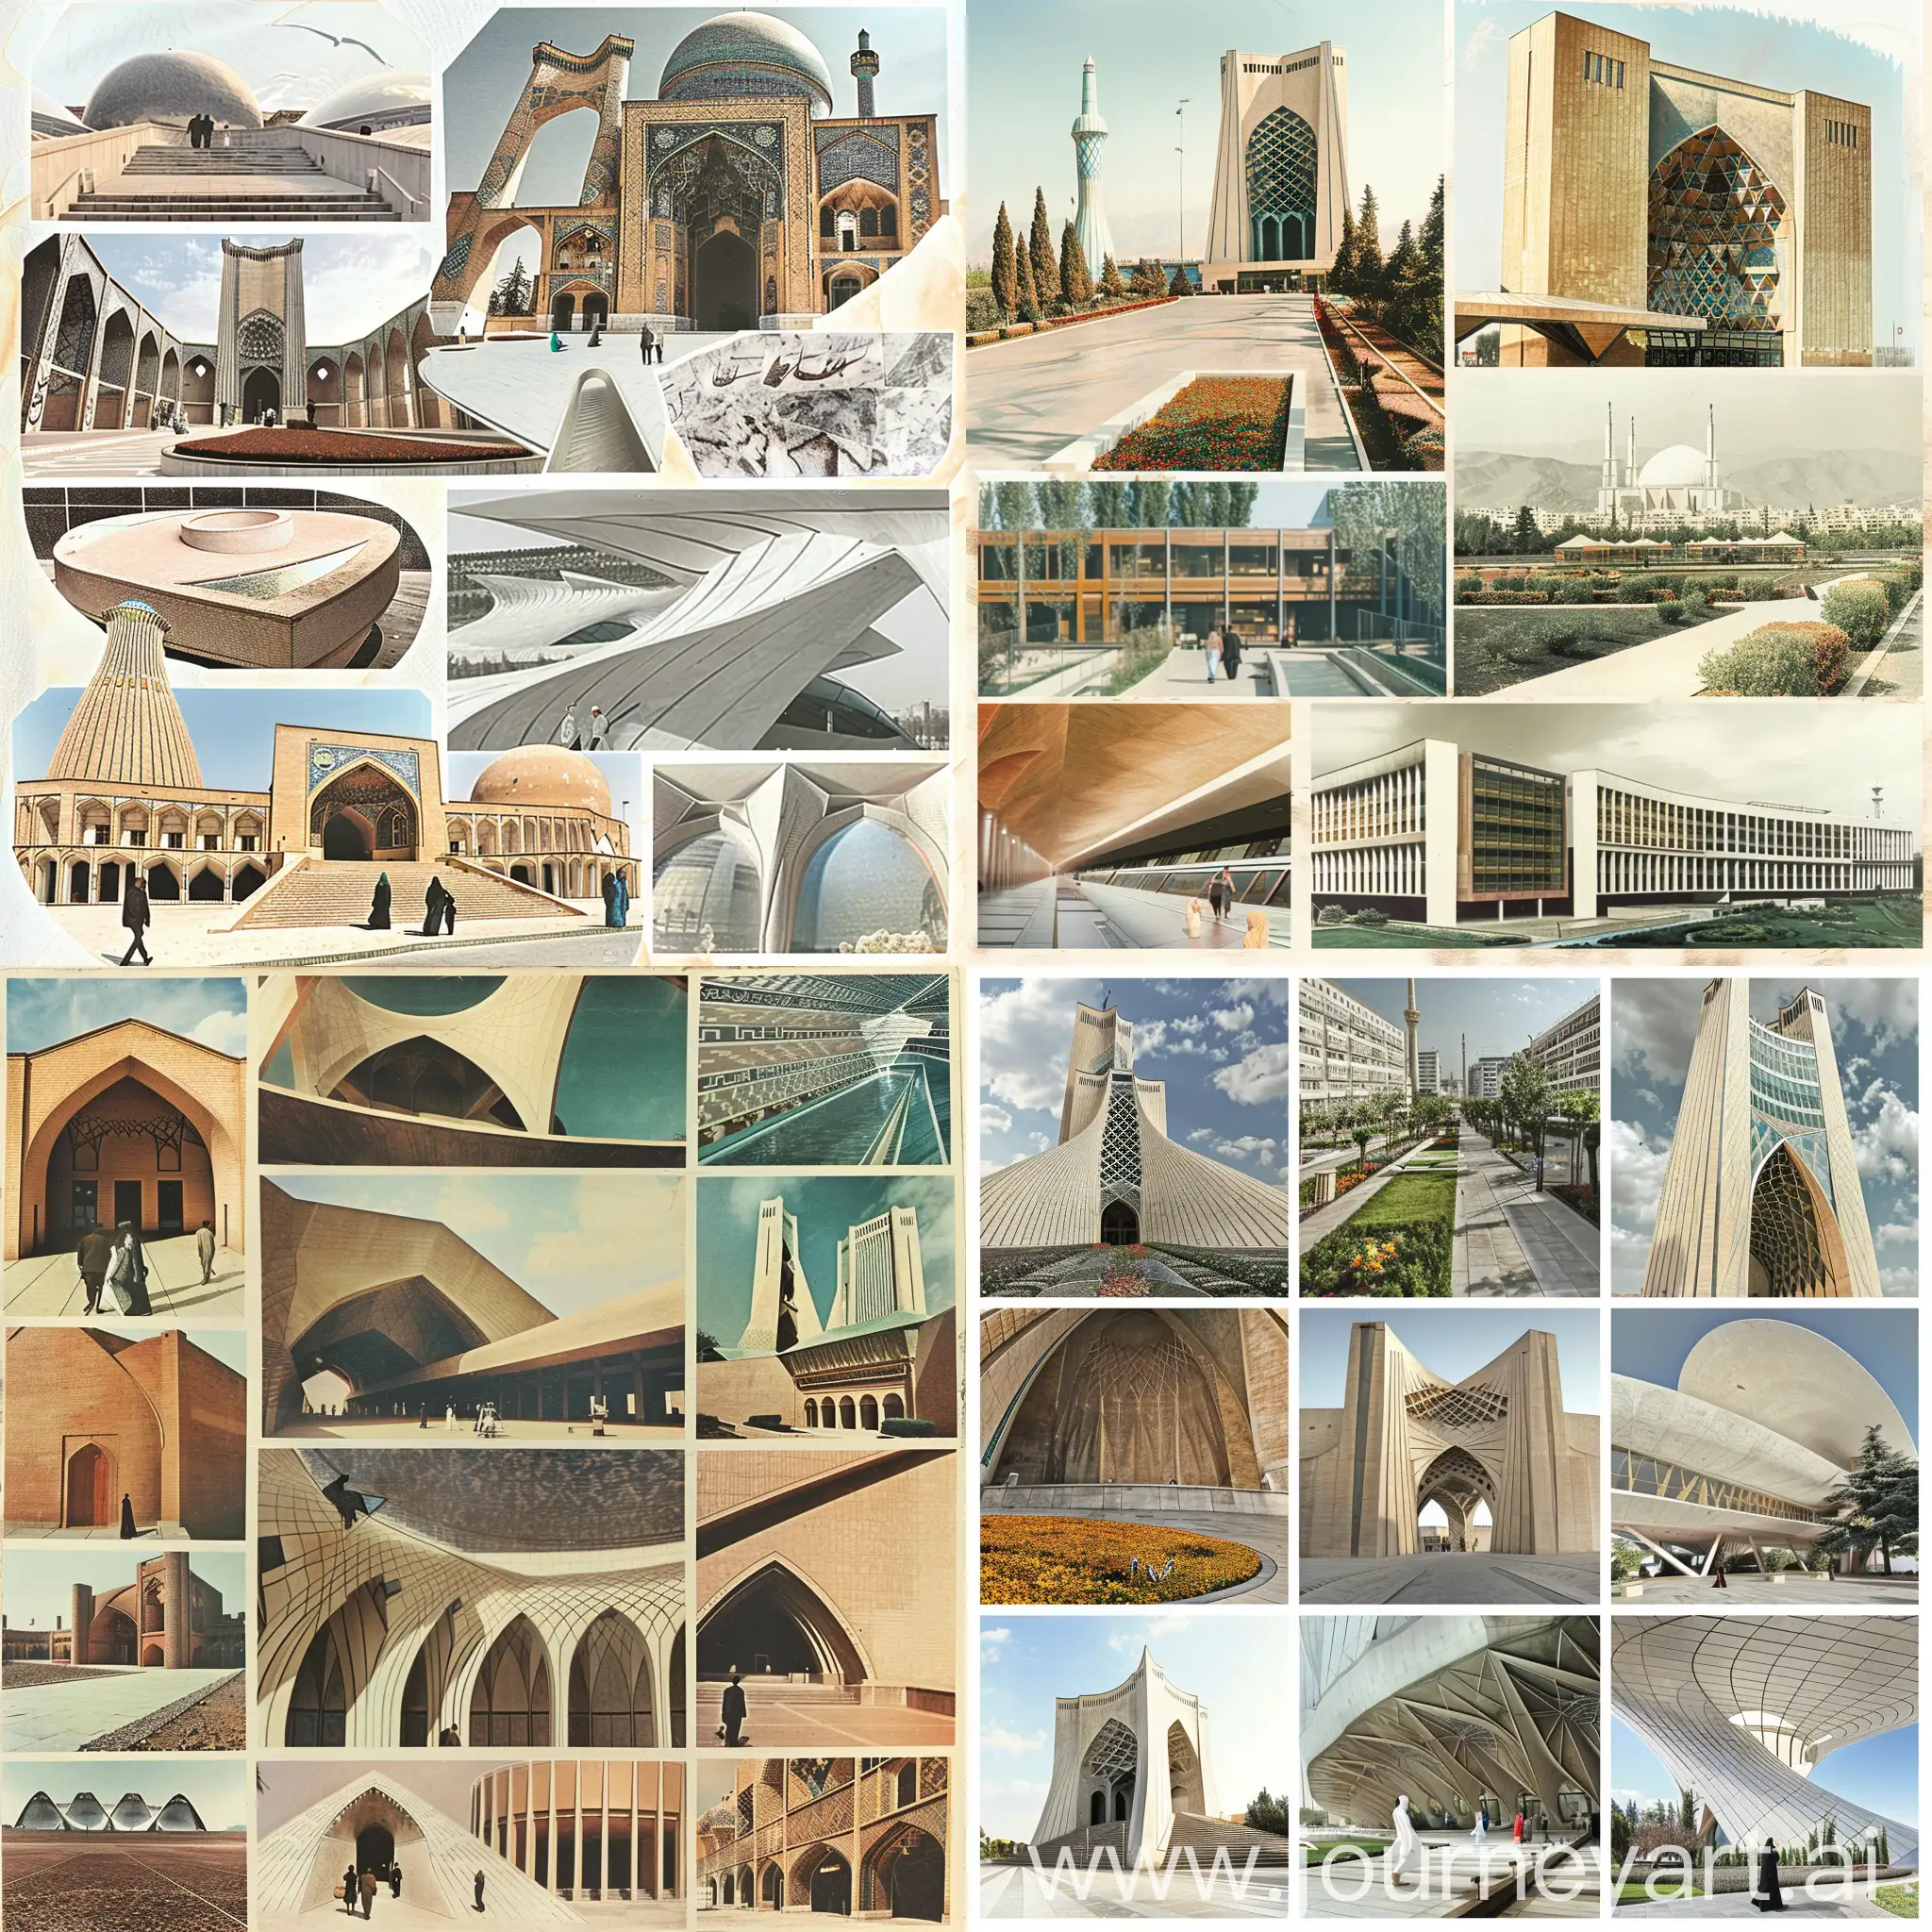 Modern-Architectural-Marvels-of-Iran-A-Collage-Tribute